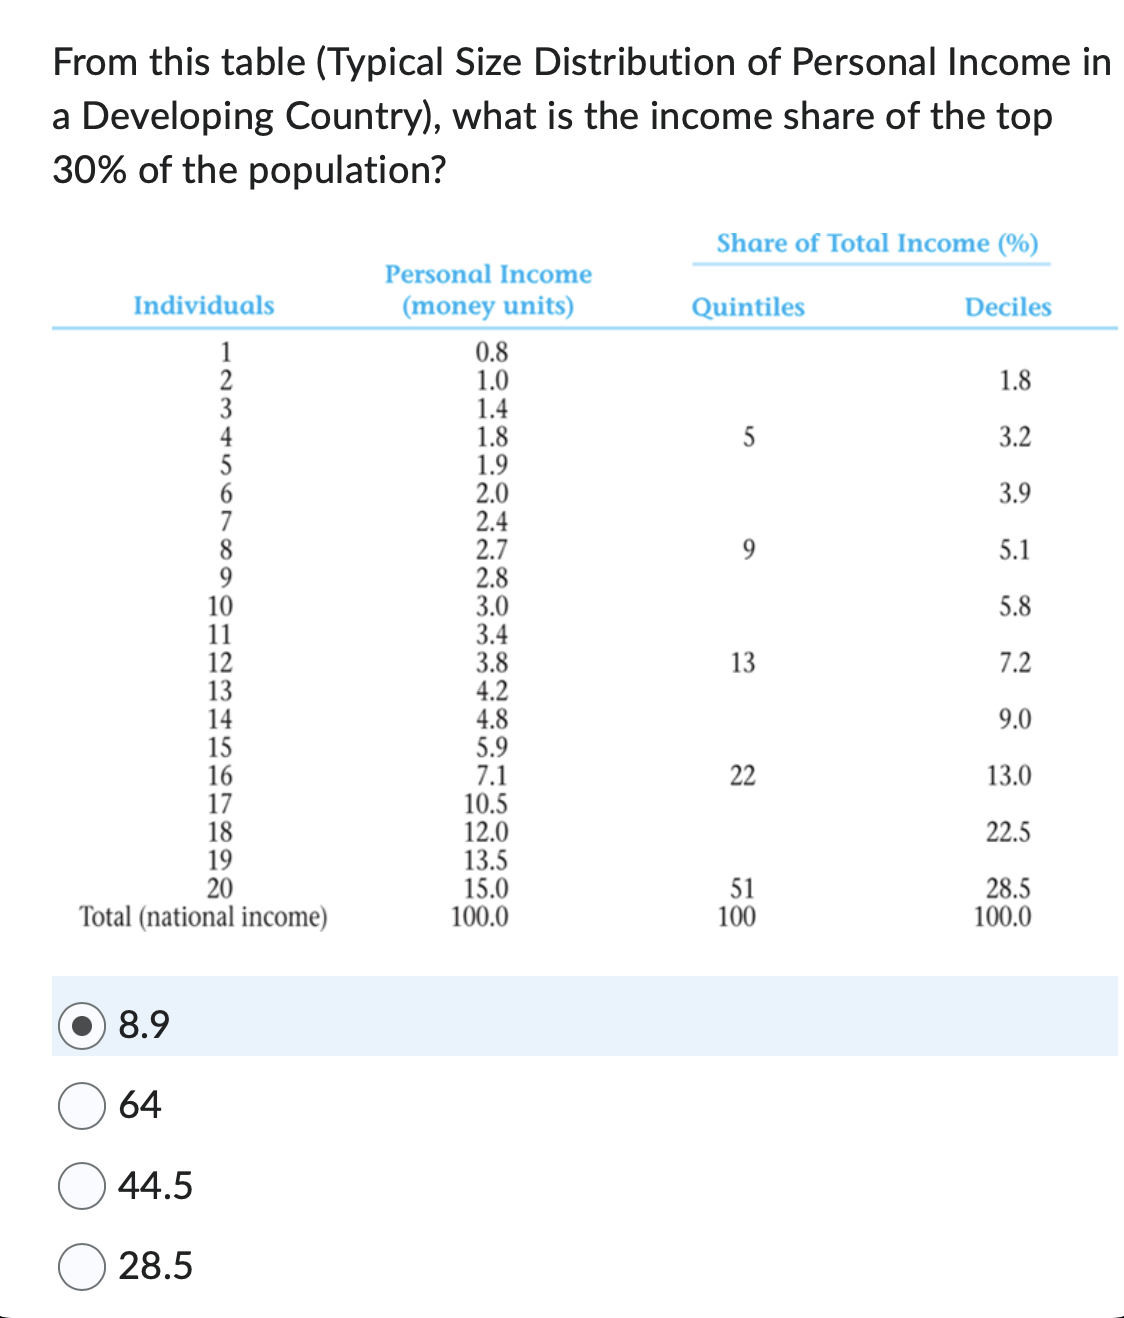 From this table (Typical Size Distribution of Personal Income in
a Developing Country), what is the income share of the top
30% of the population?
Individuals
123456799
10
11
12
13
14
15
16
17
18
19
20
Total (national income)
8.9
64
44.5
28.5
Personal Income
(money units)
0.8
1.0
1.4
1.8
1.9
2.0
NNNS
2.4
2.7
2.8
3.0
3.4
3.8
4.2
4.8
5.9
7.1
10.5
12.0
13.5
15.0
100.0
Share of Total Income (%)
Quintiles
5
9
13
22
51
100
Deciles
1.8
3.2
3.9
5.1
5.8
7.2
9.0
13.0
22.5
28.5
100.0